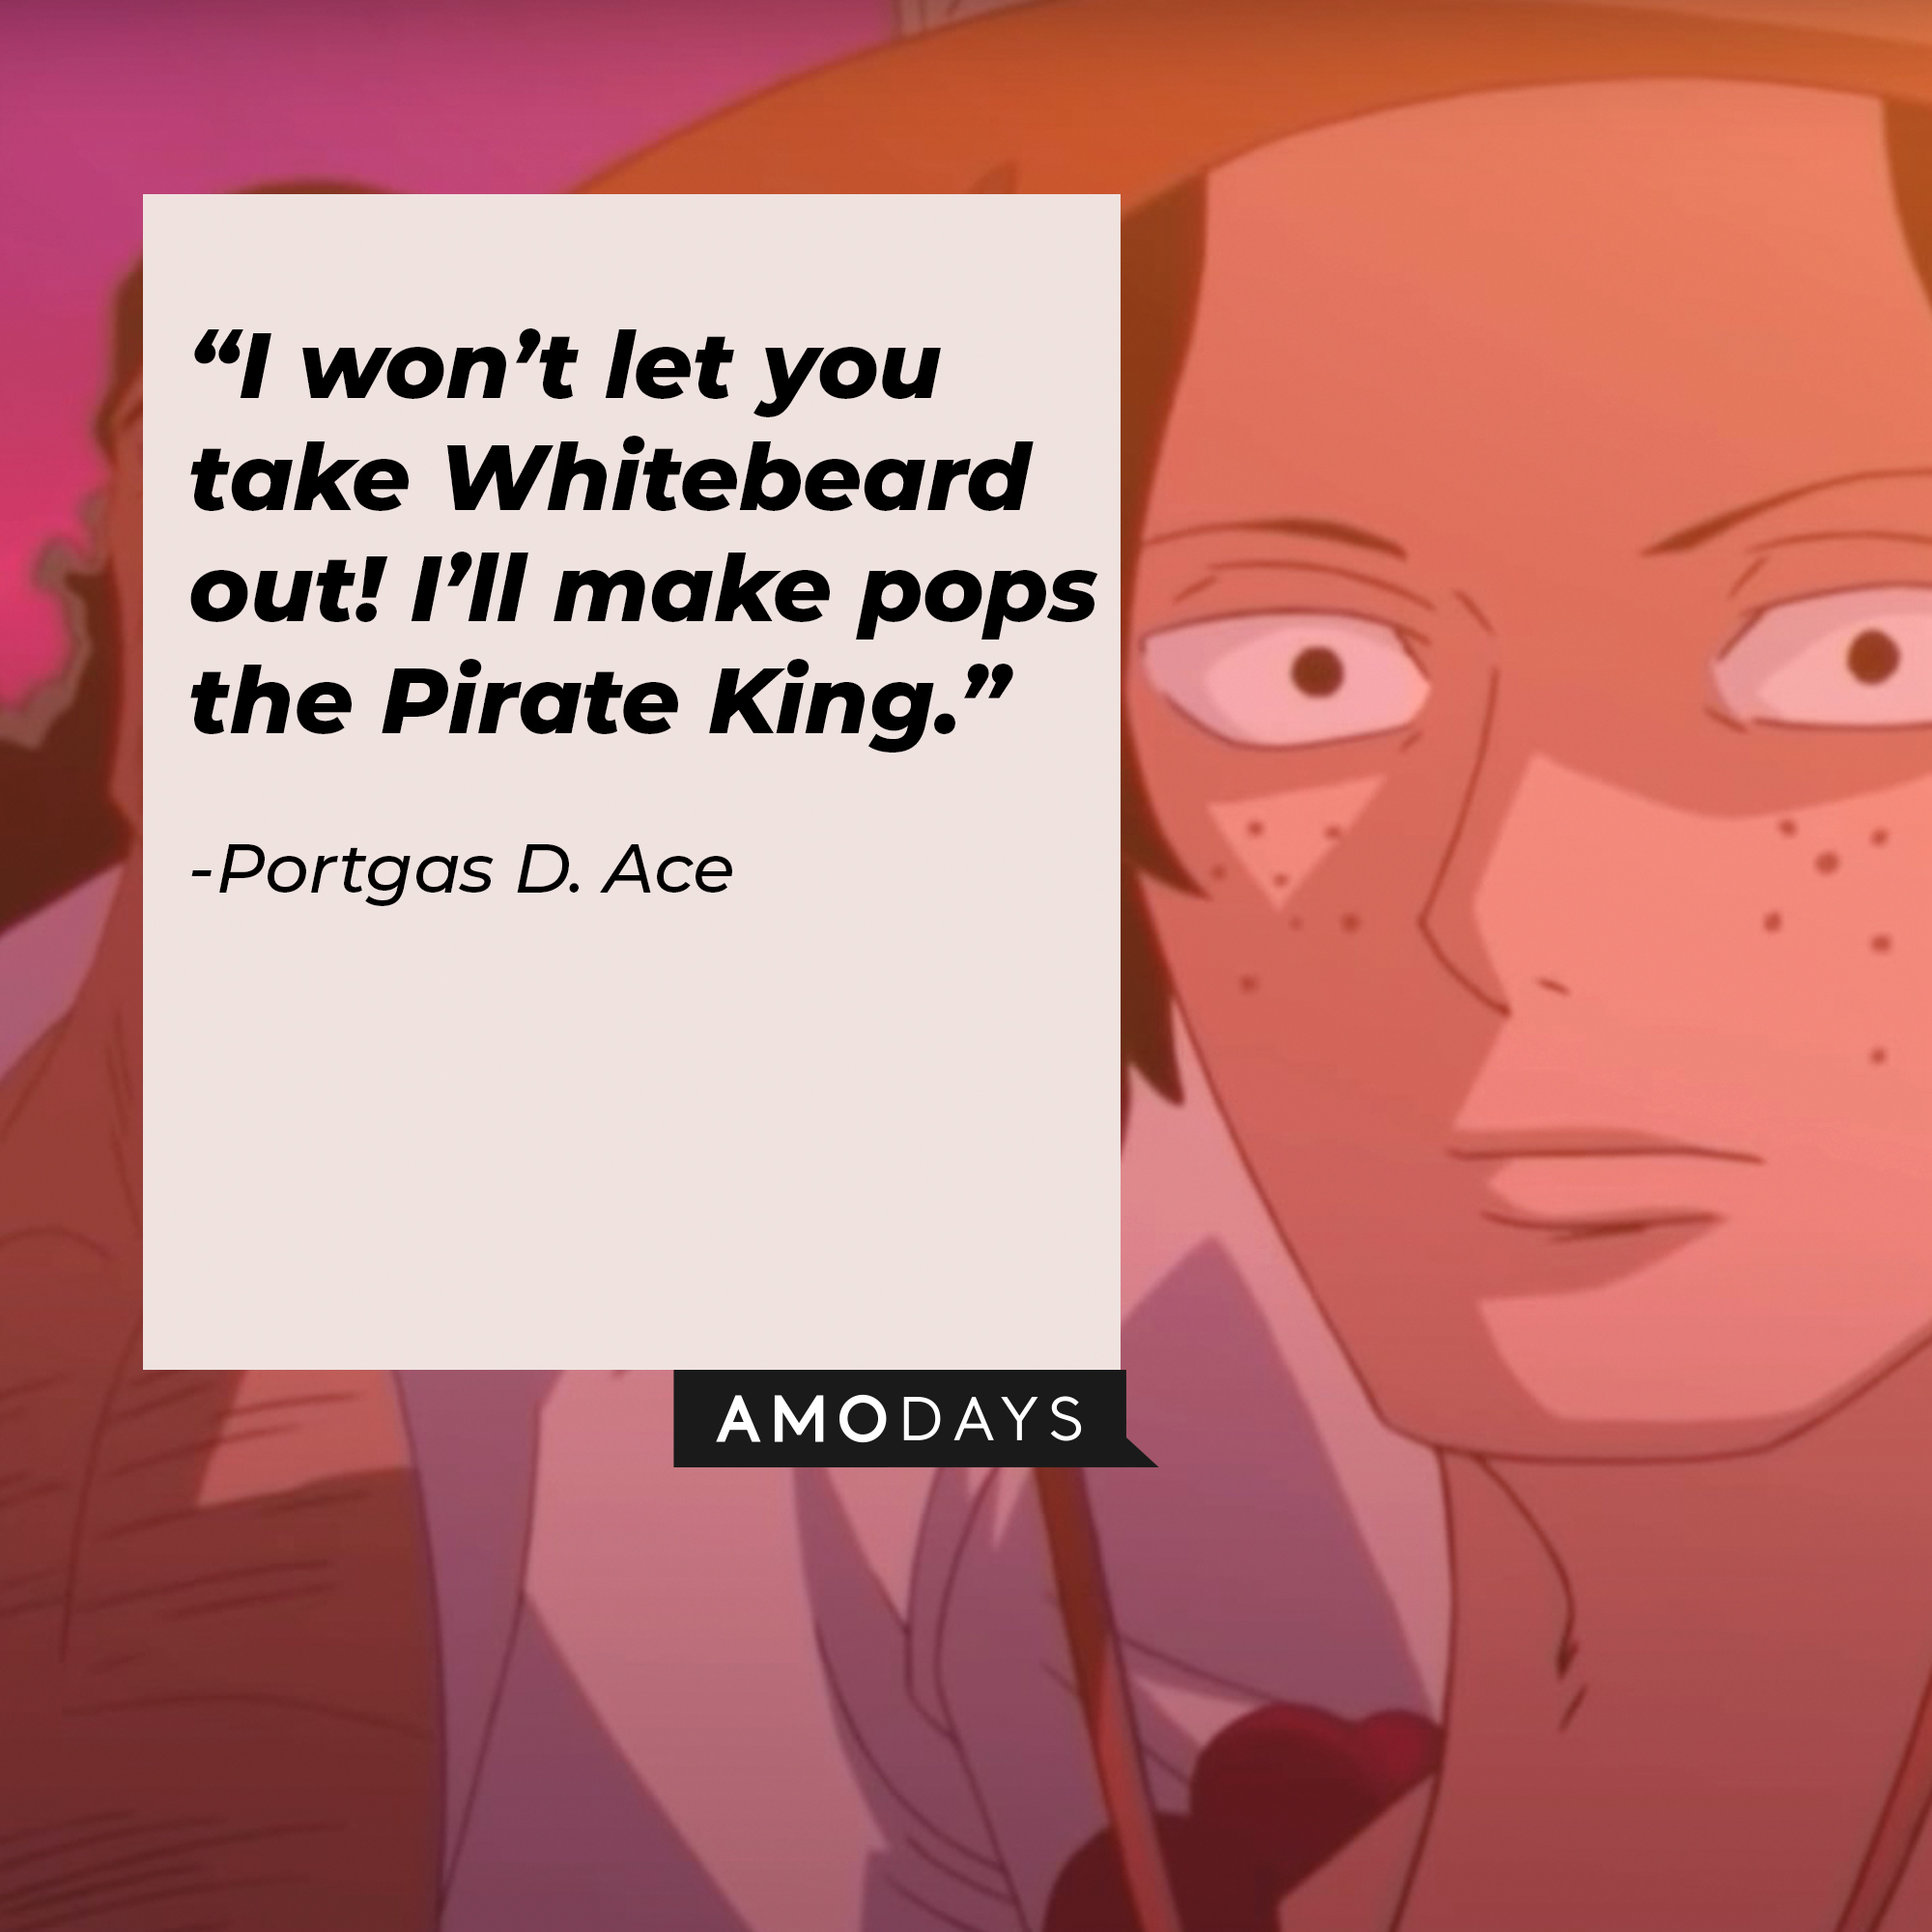 Portgas D. Ac with a text overlay reading, “I won’t let you take Whitebeard out! I’ll make pops the Pirate King.” | Source: facebook.com/onepieceofficial